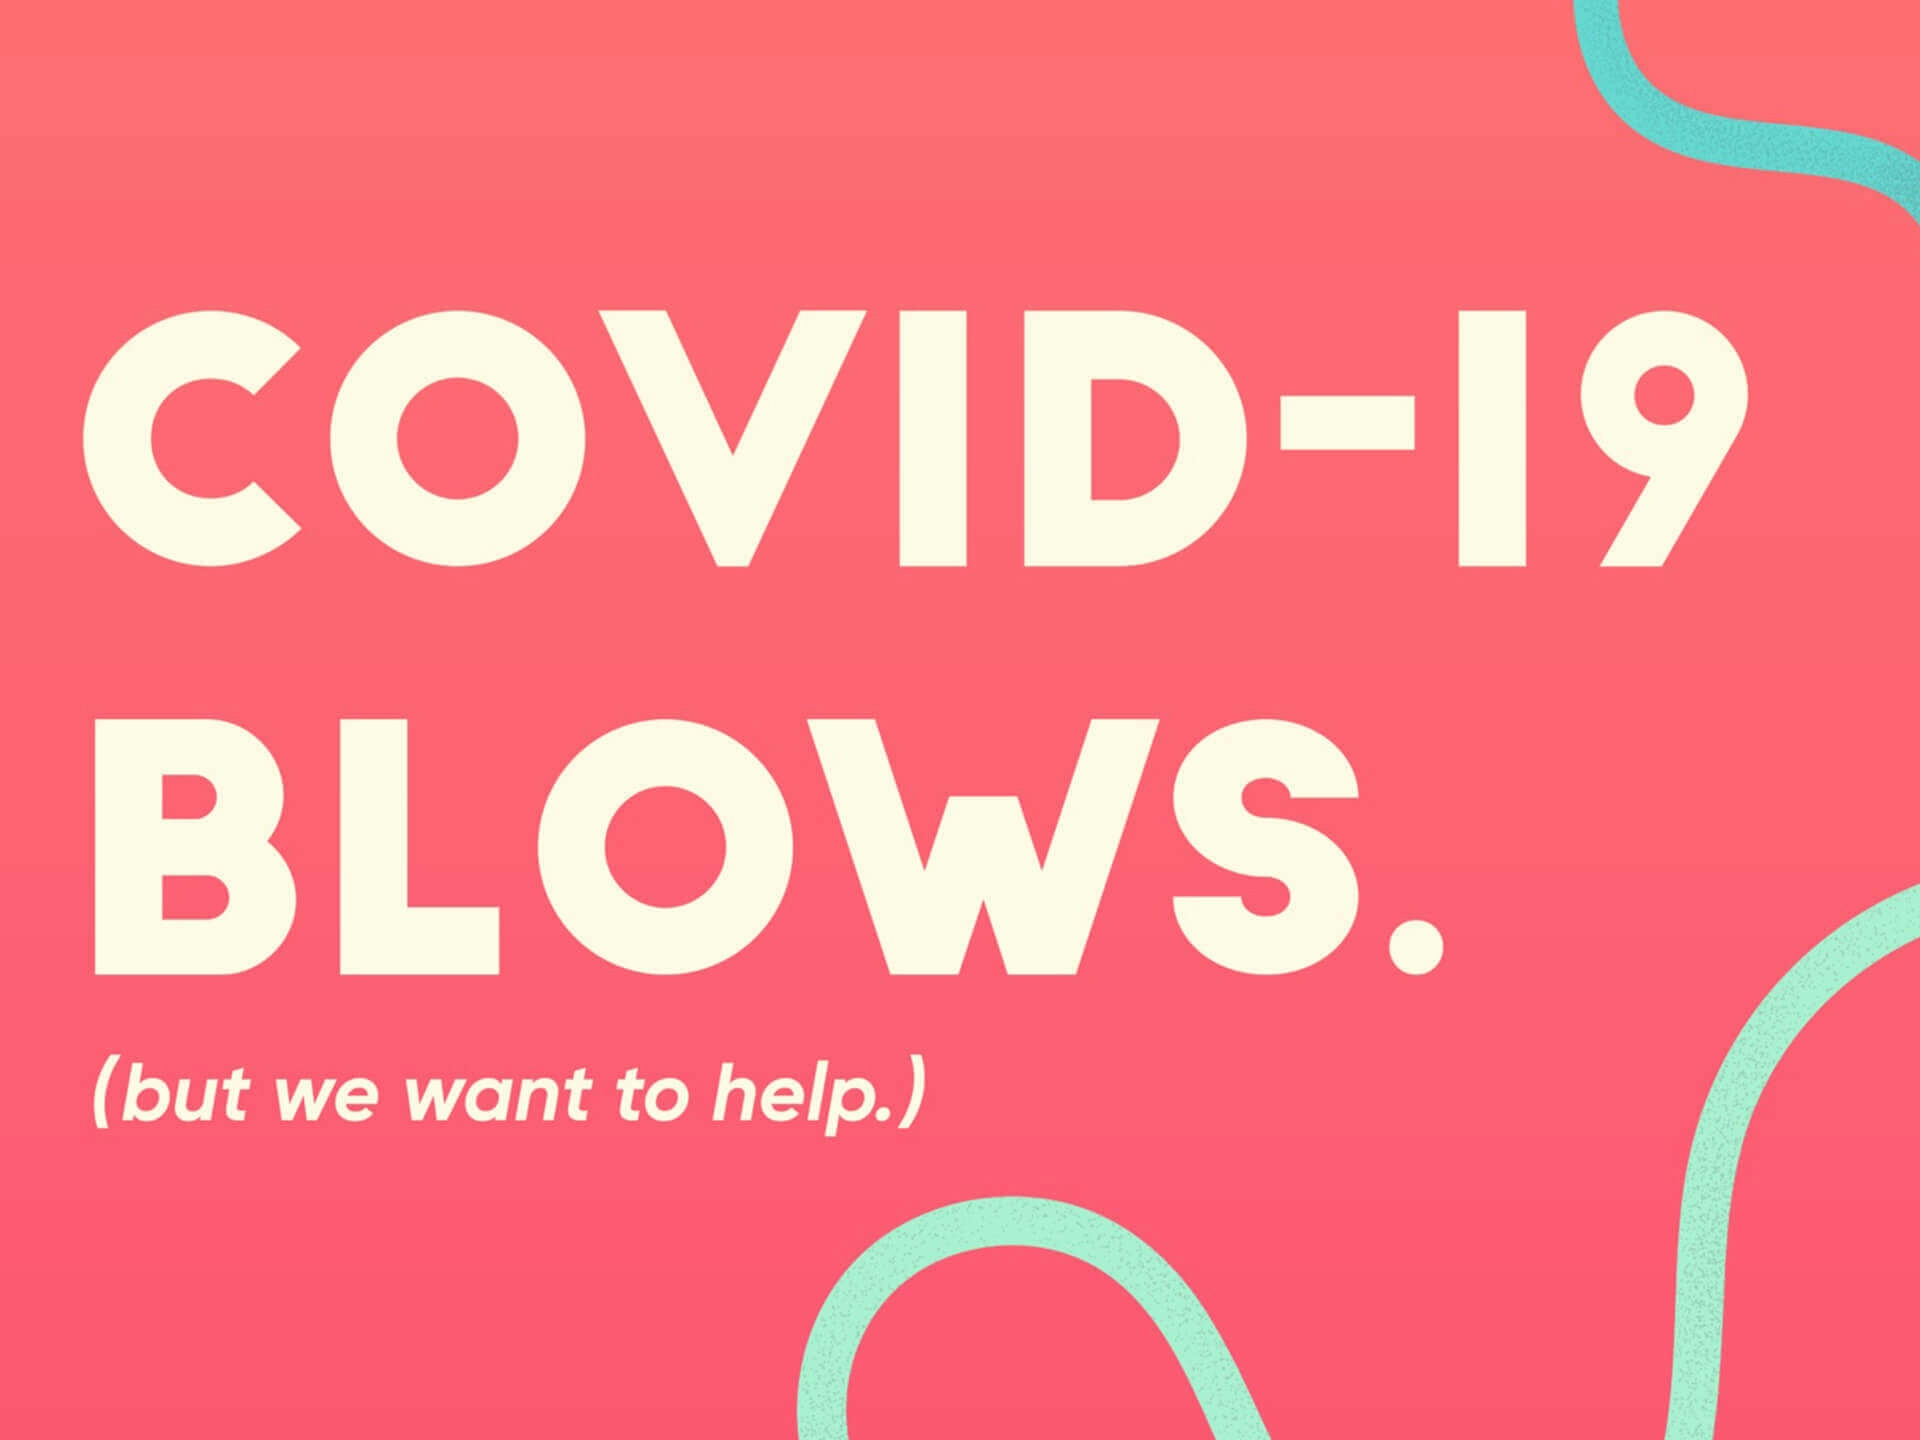 Our Favorite Local Businesses to Support During COVID-19, by Madeline Christensen